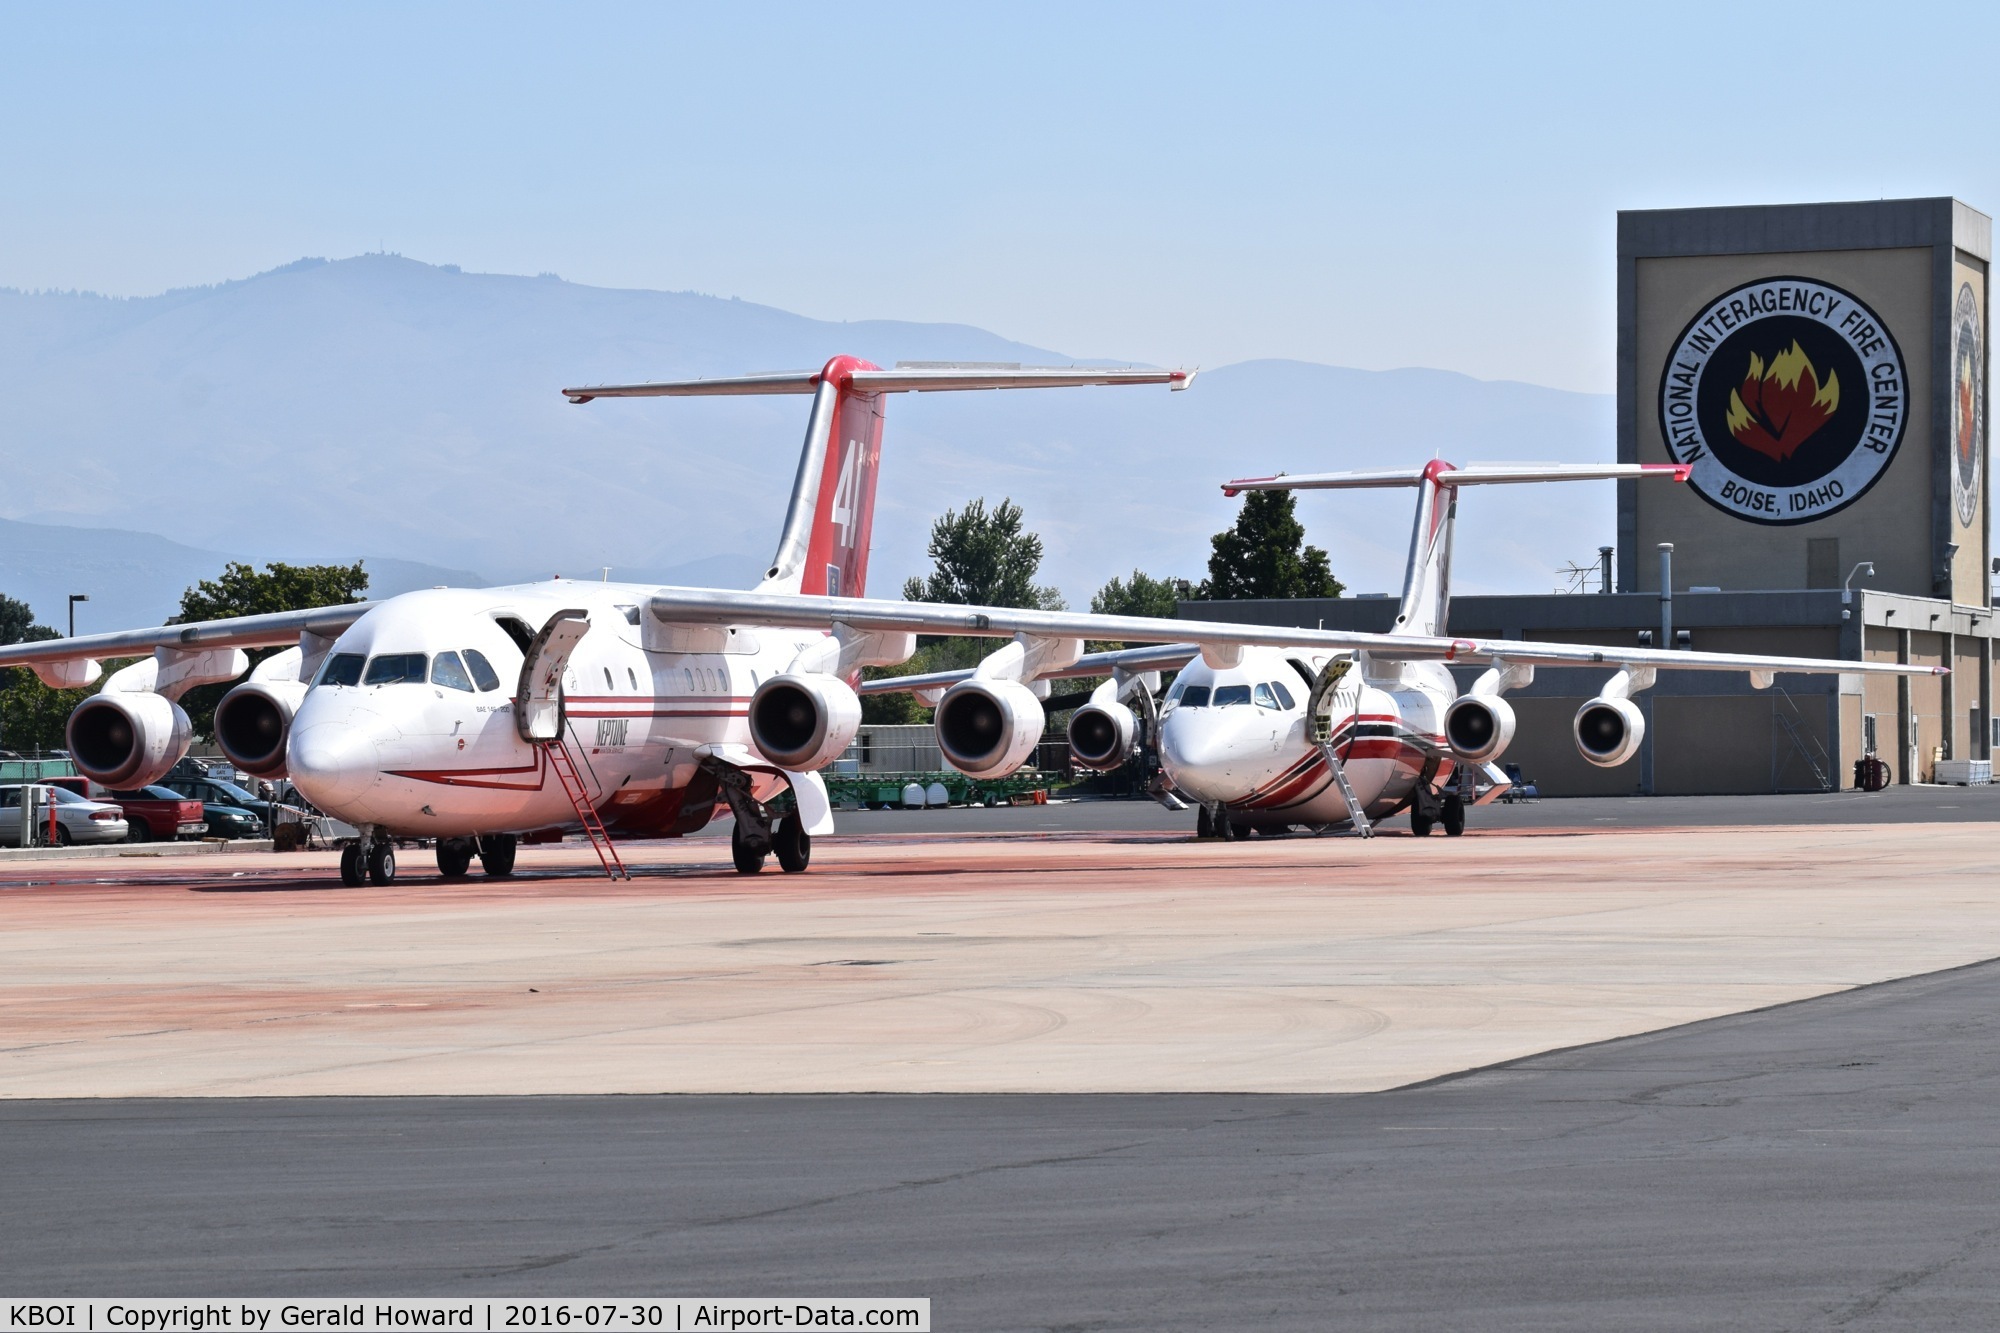 Boise Air Terminal/gowen Fld Airport (BOI) - Fire tankers parked on NIFC ramp.